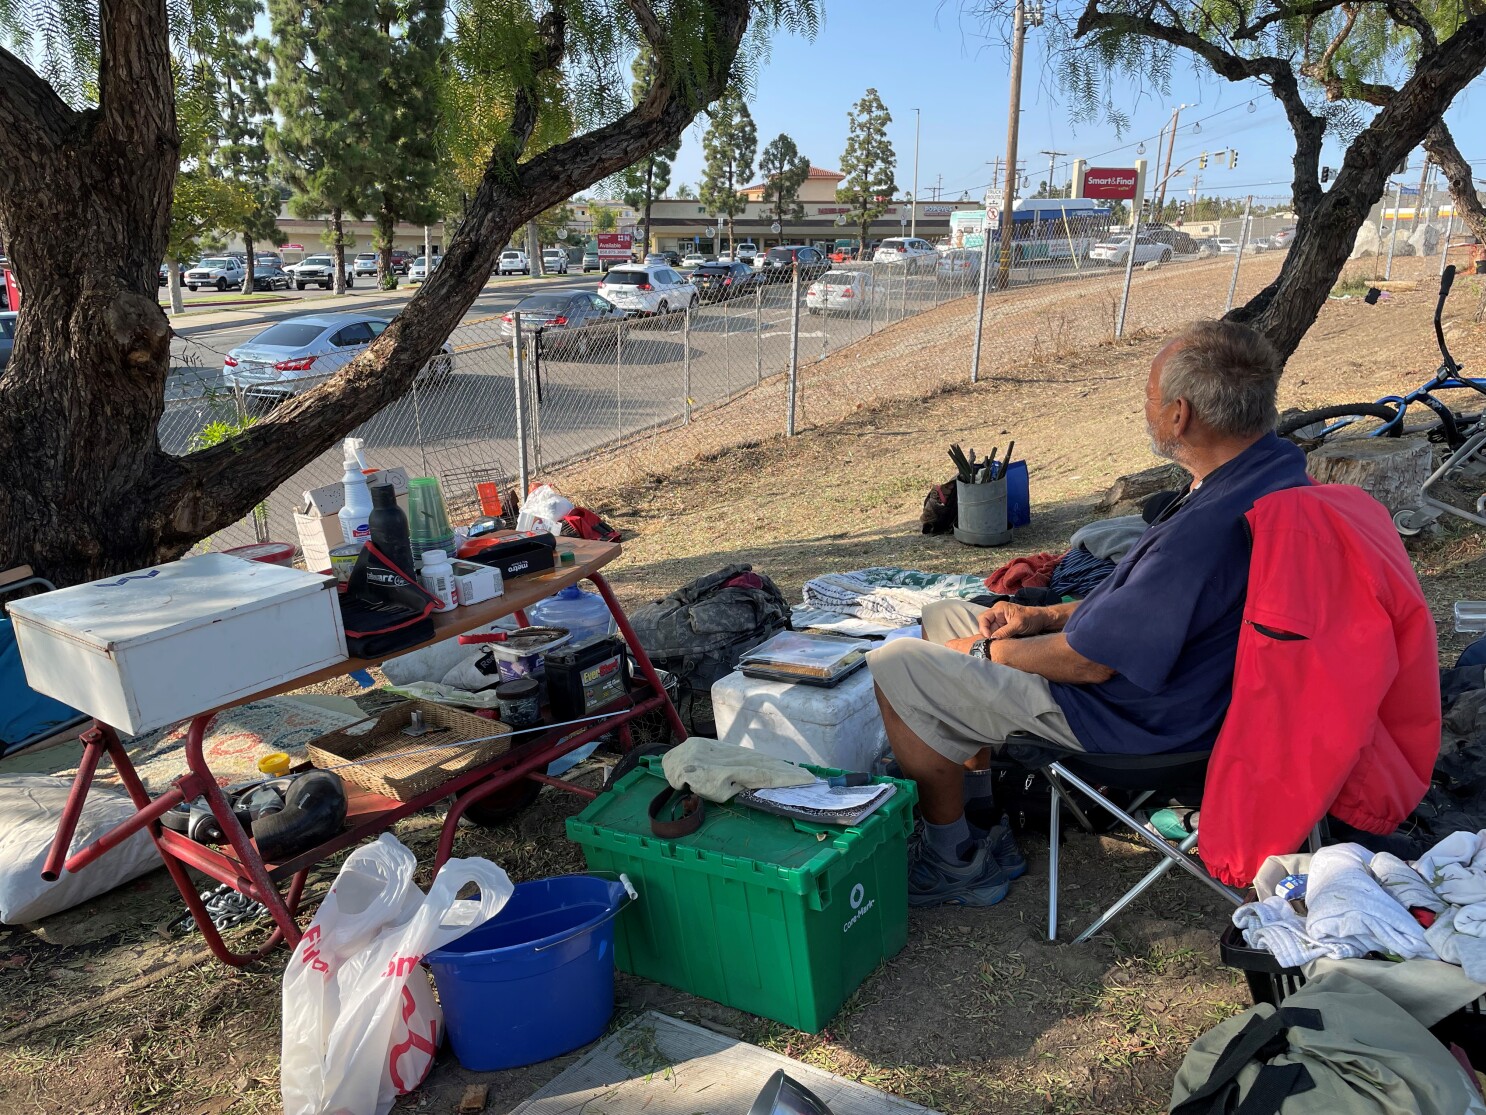 Caltrans To Begin Clearing More Homeless Encampments - The San Diego Union-tribune